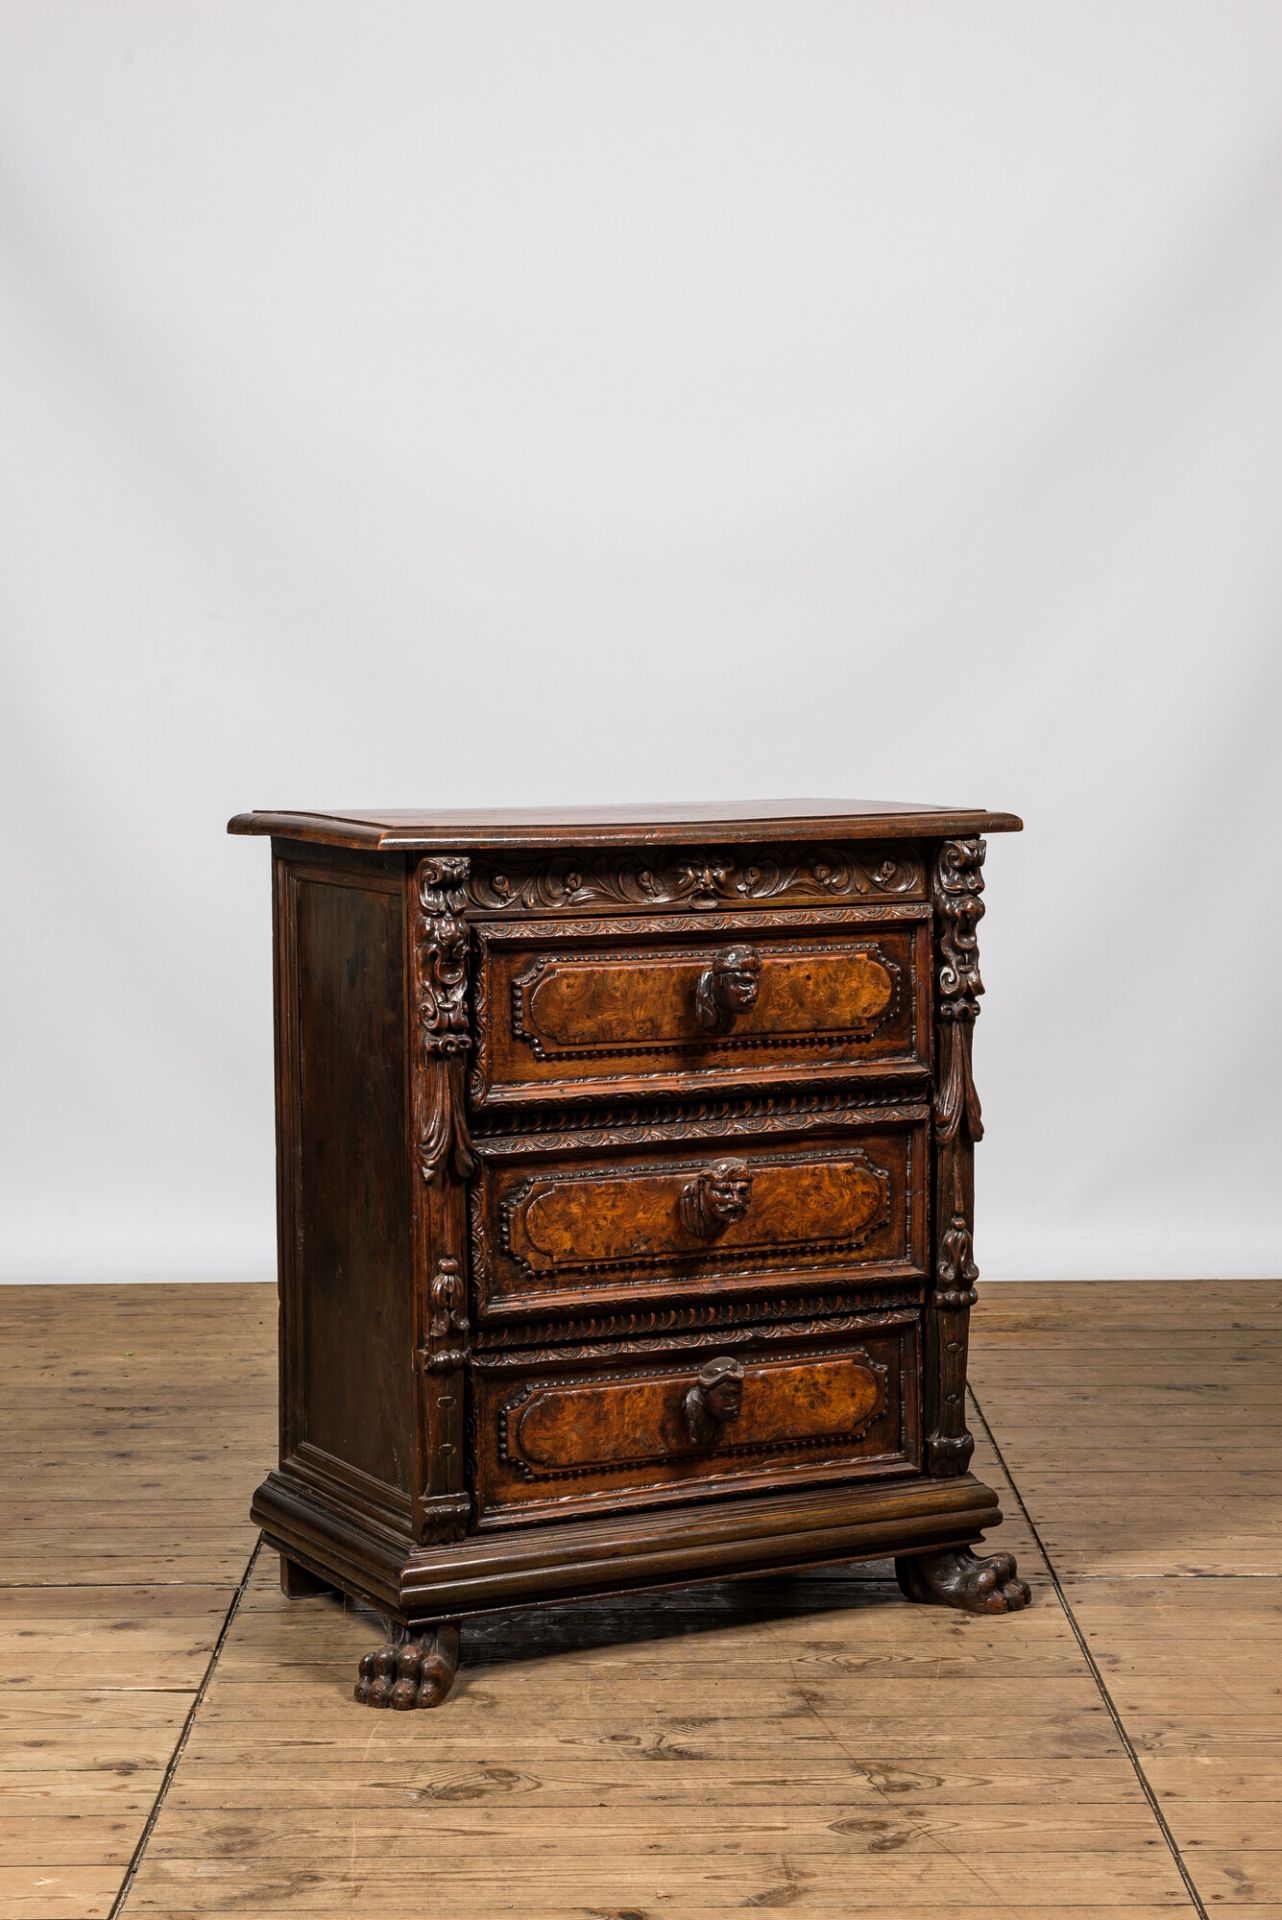 An Italian richly decorated walnut and burl wood chest of drawers with mascarons, 19th C. - Bild 2 aus 3